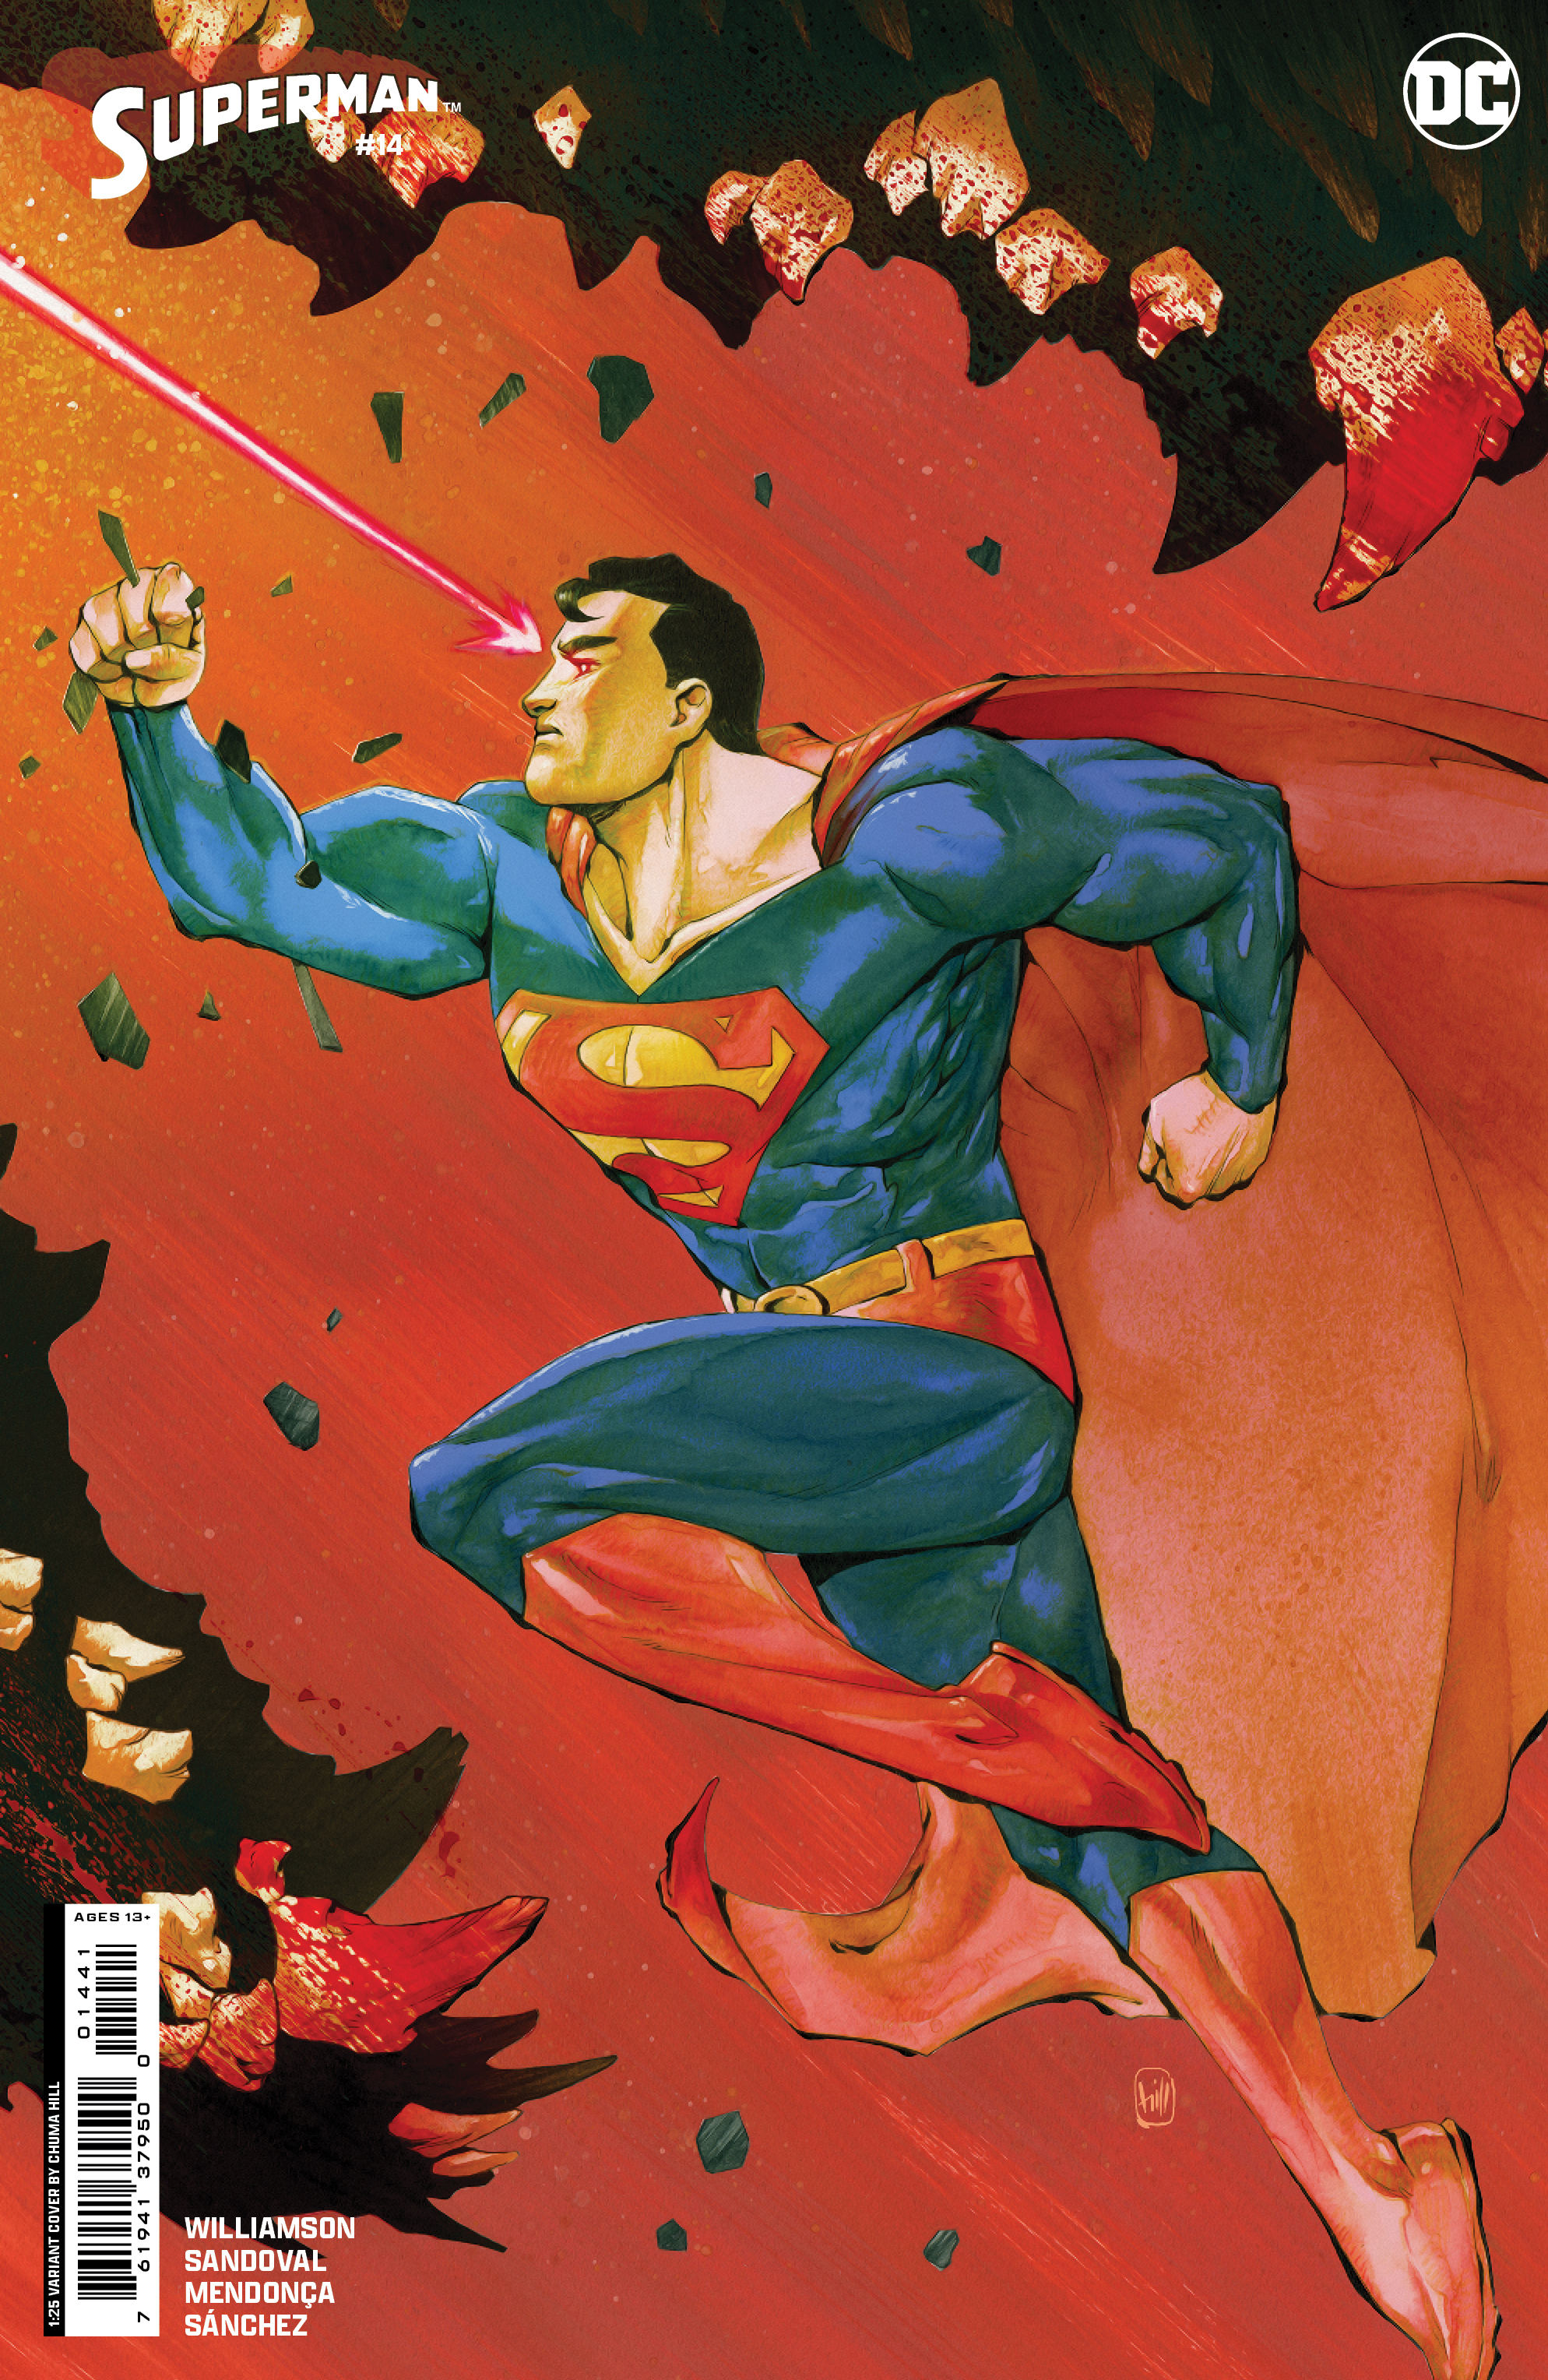 Covers for Superman #14